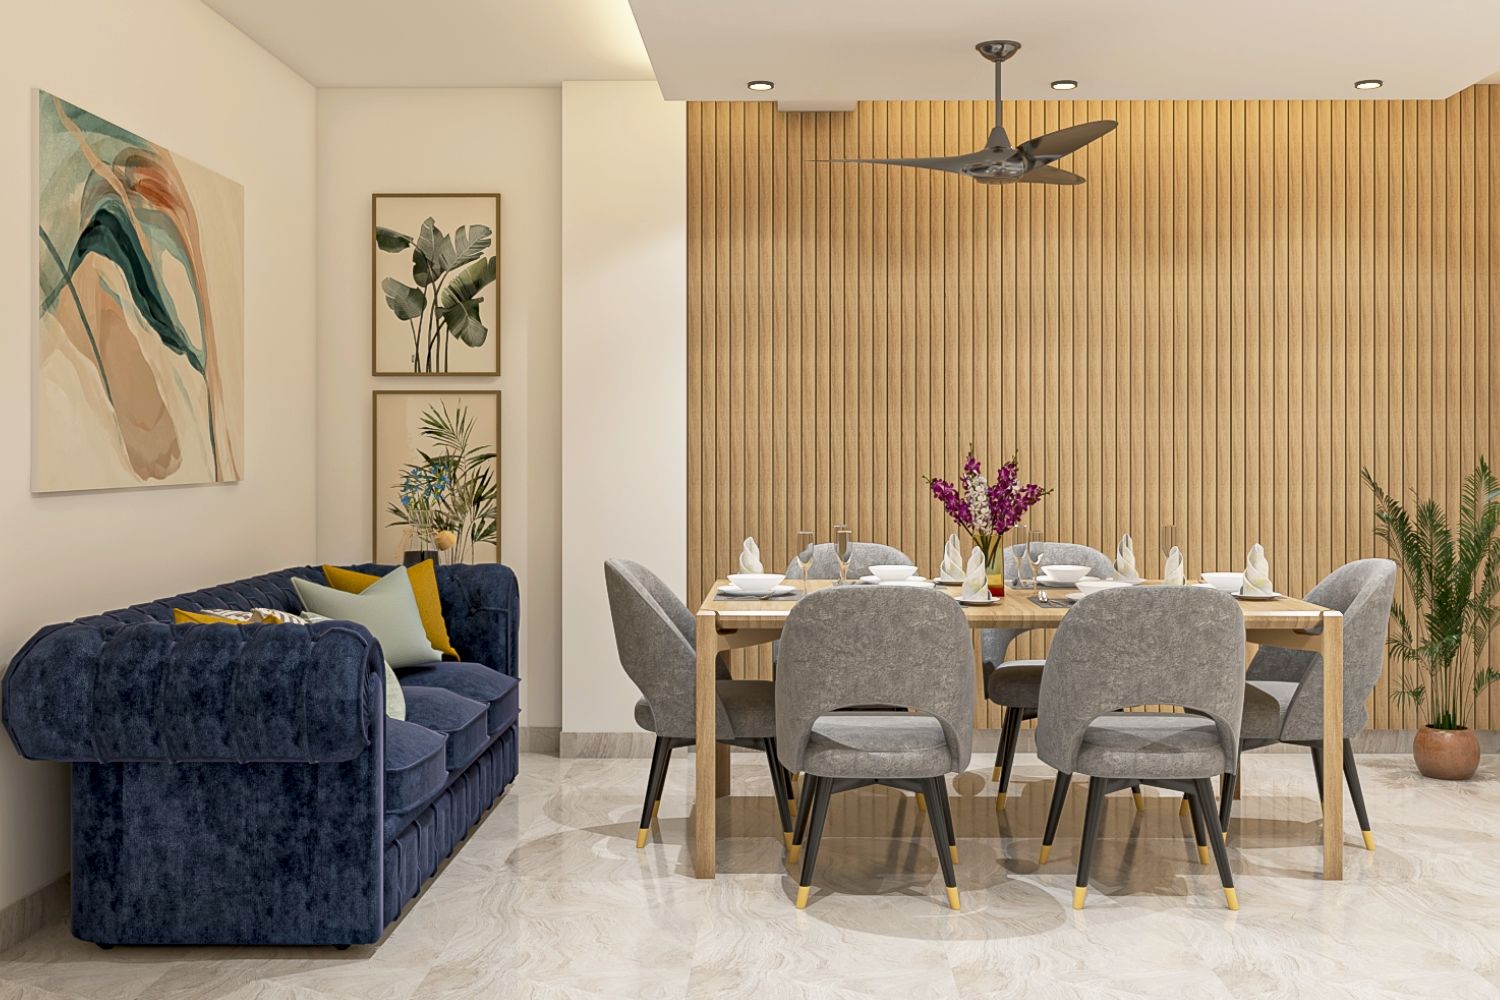 Contemporary Wood And Grey 6-Seater Dining Room Design With Wooden Wall Panelling